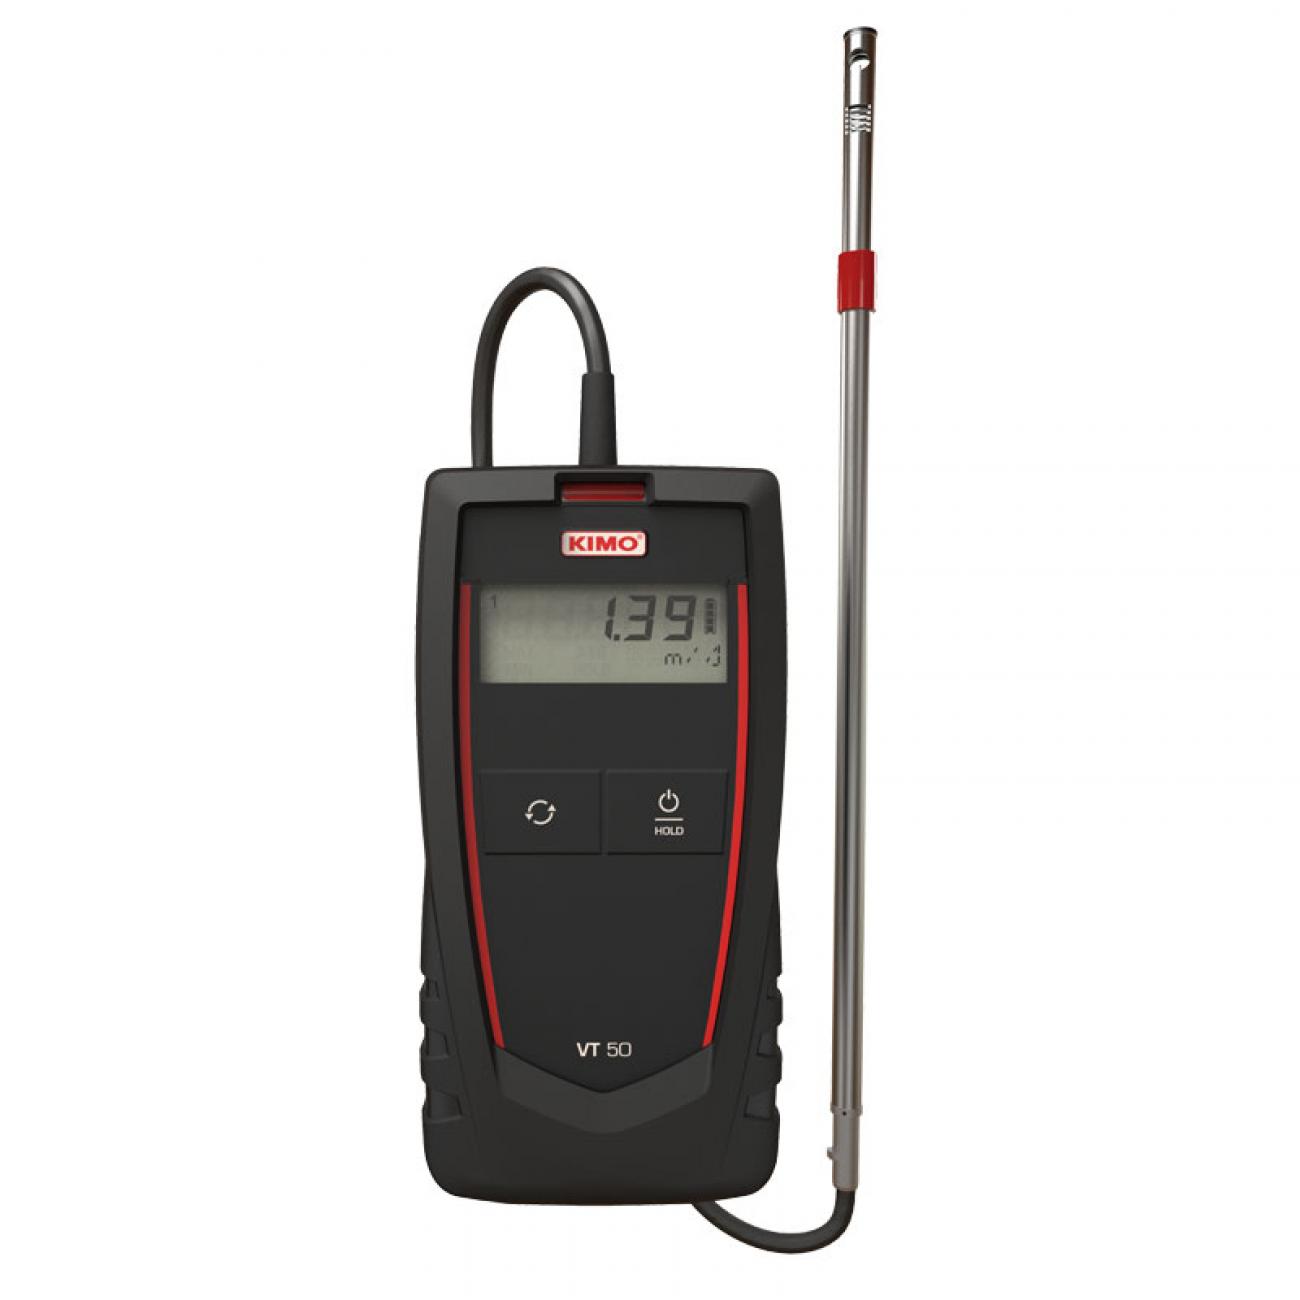 VT 50 Thermo-anemometer with hotwire probe